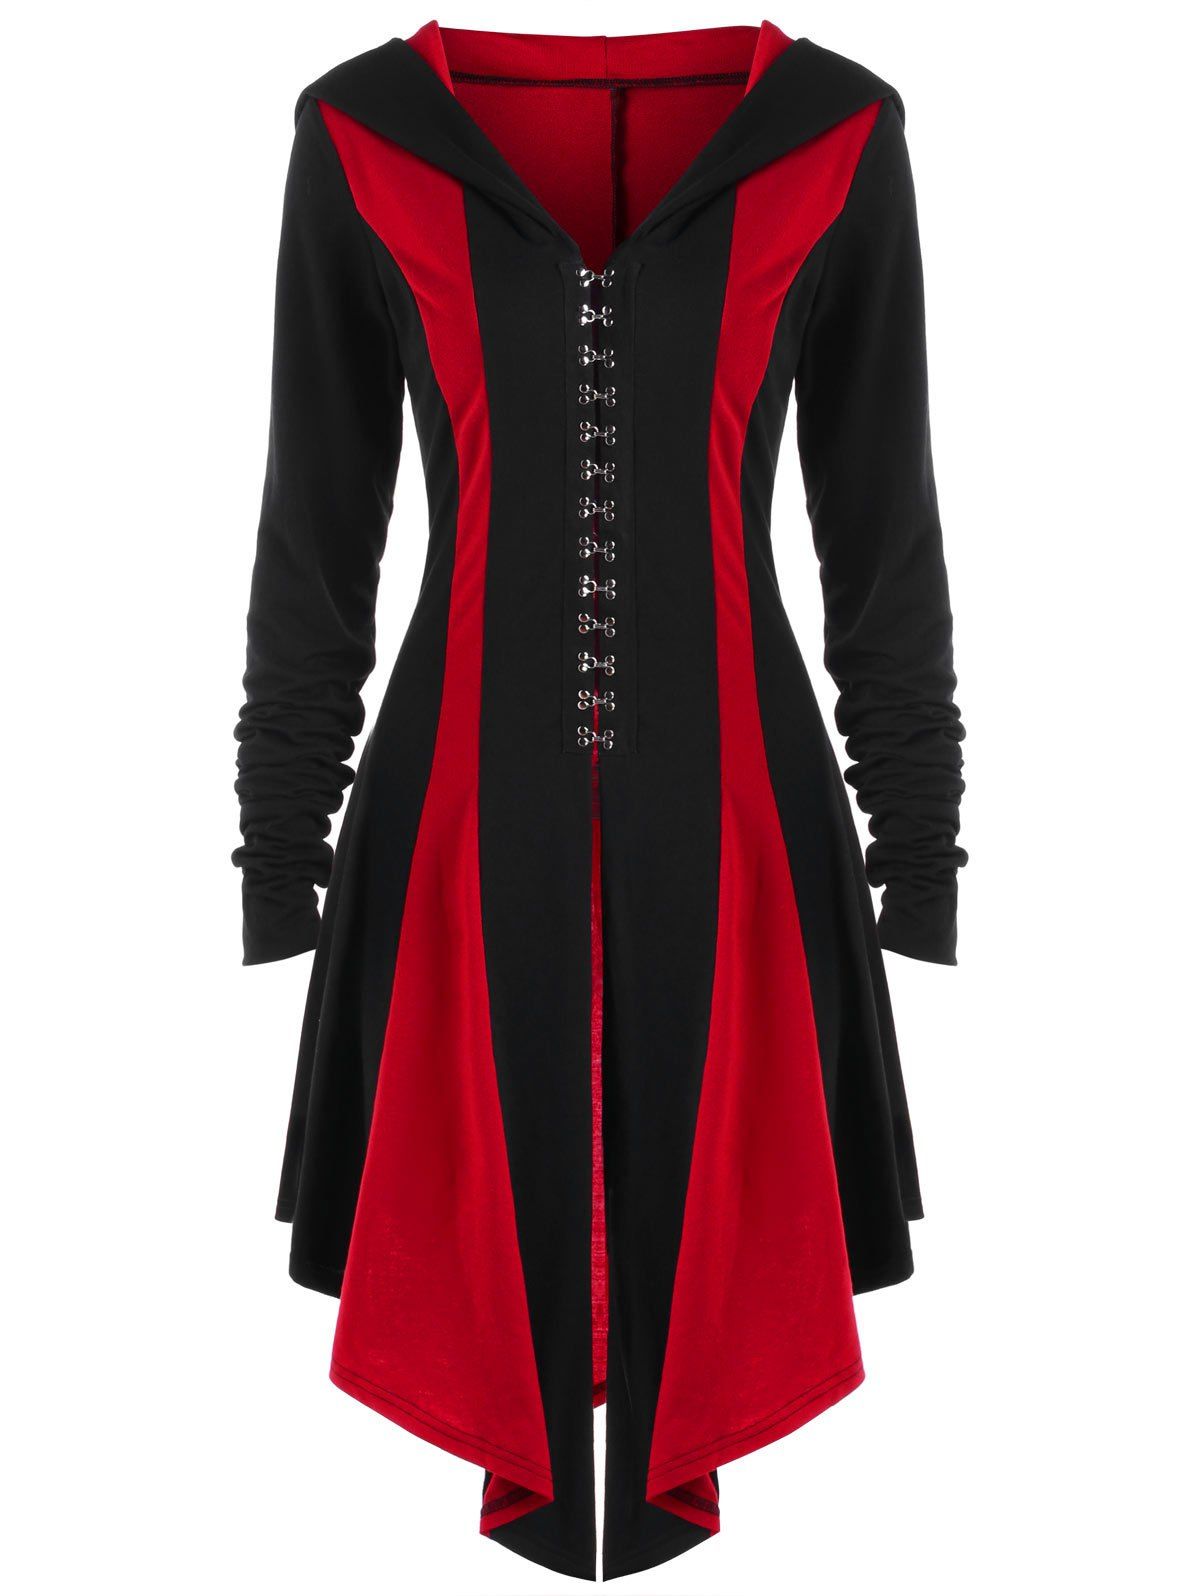 [17% OFF] 2021 Hooded Lace Up Hook Button Coat In RED/BLACK | DressLily